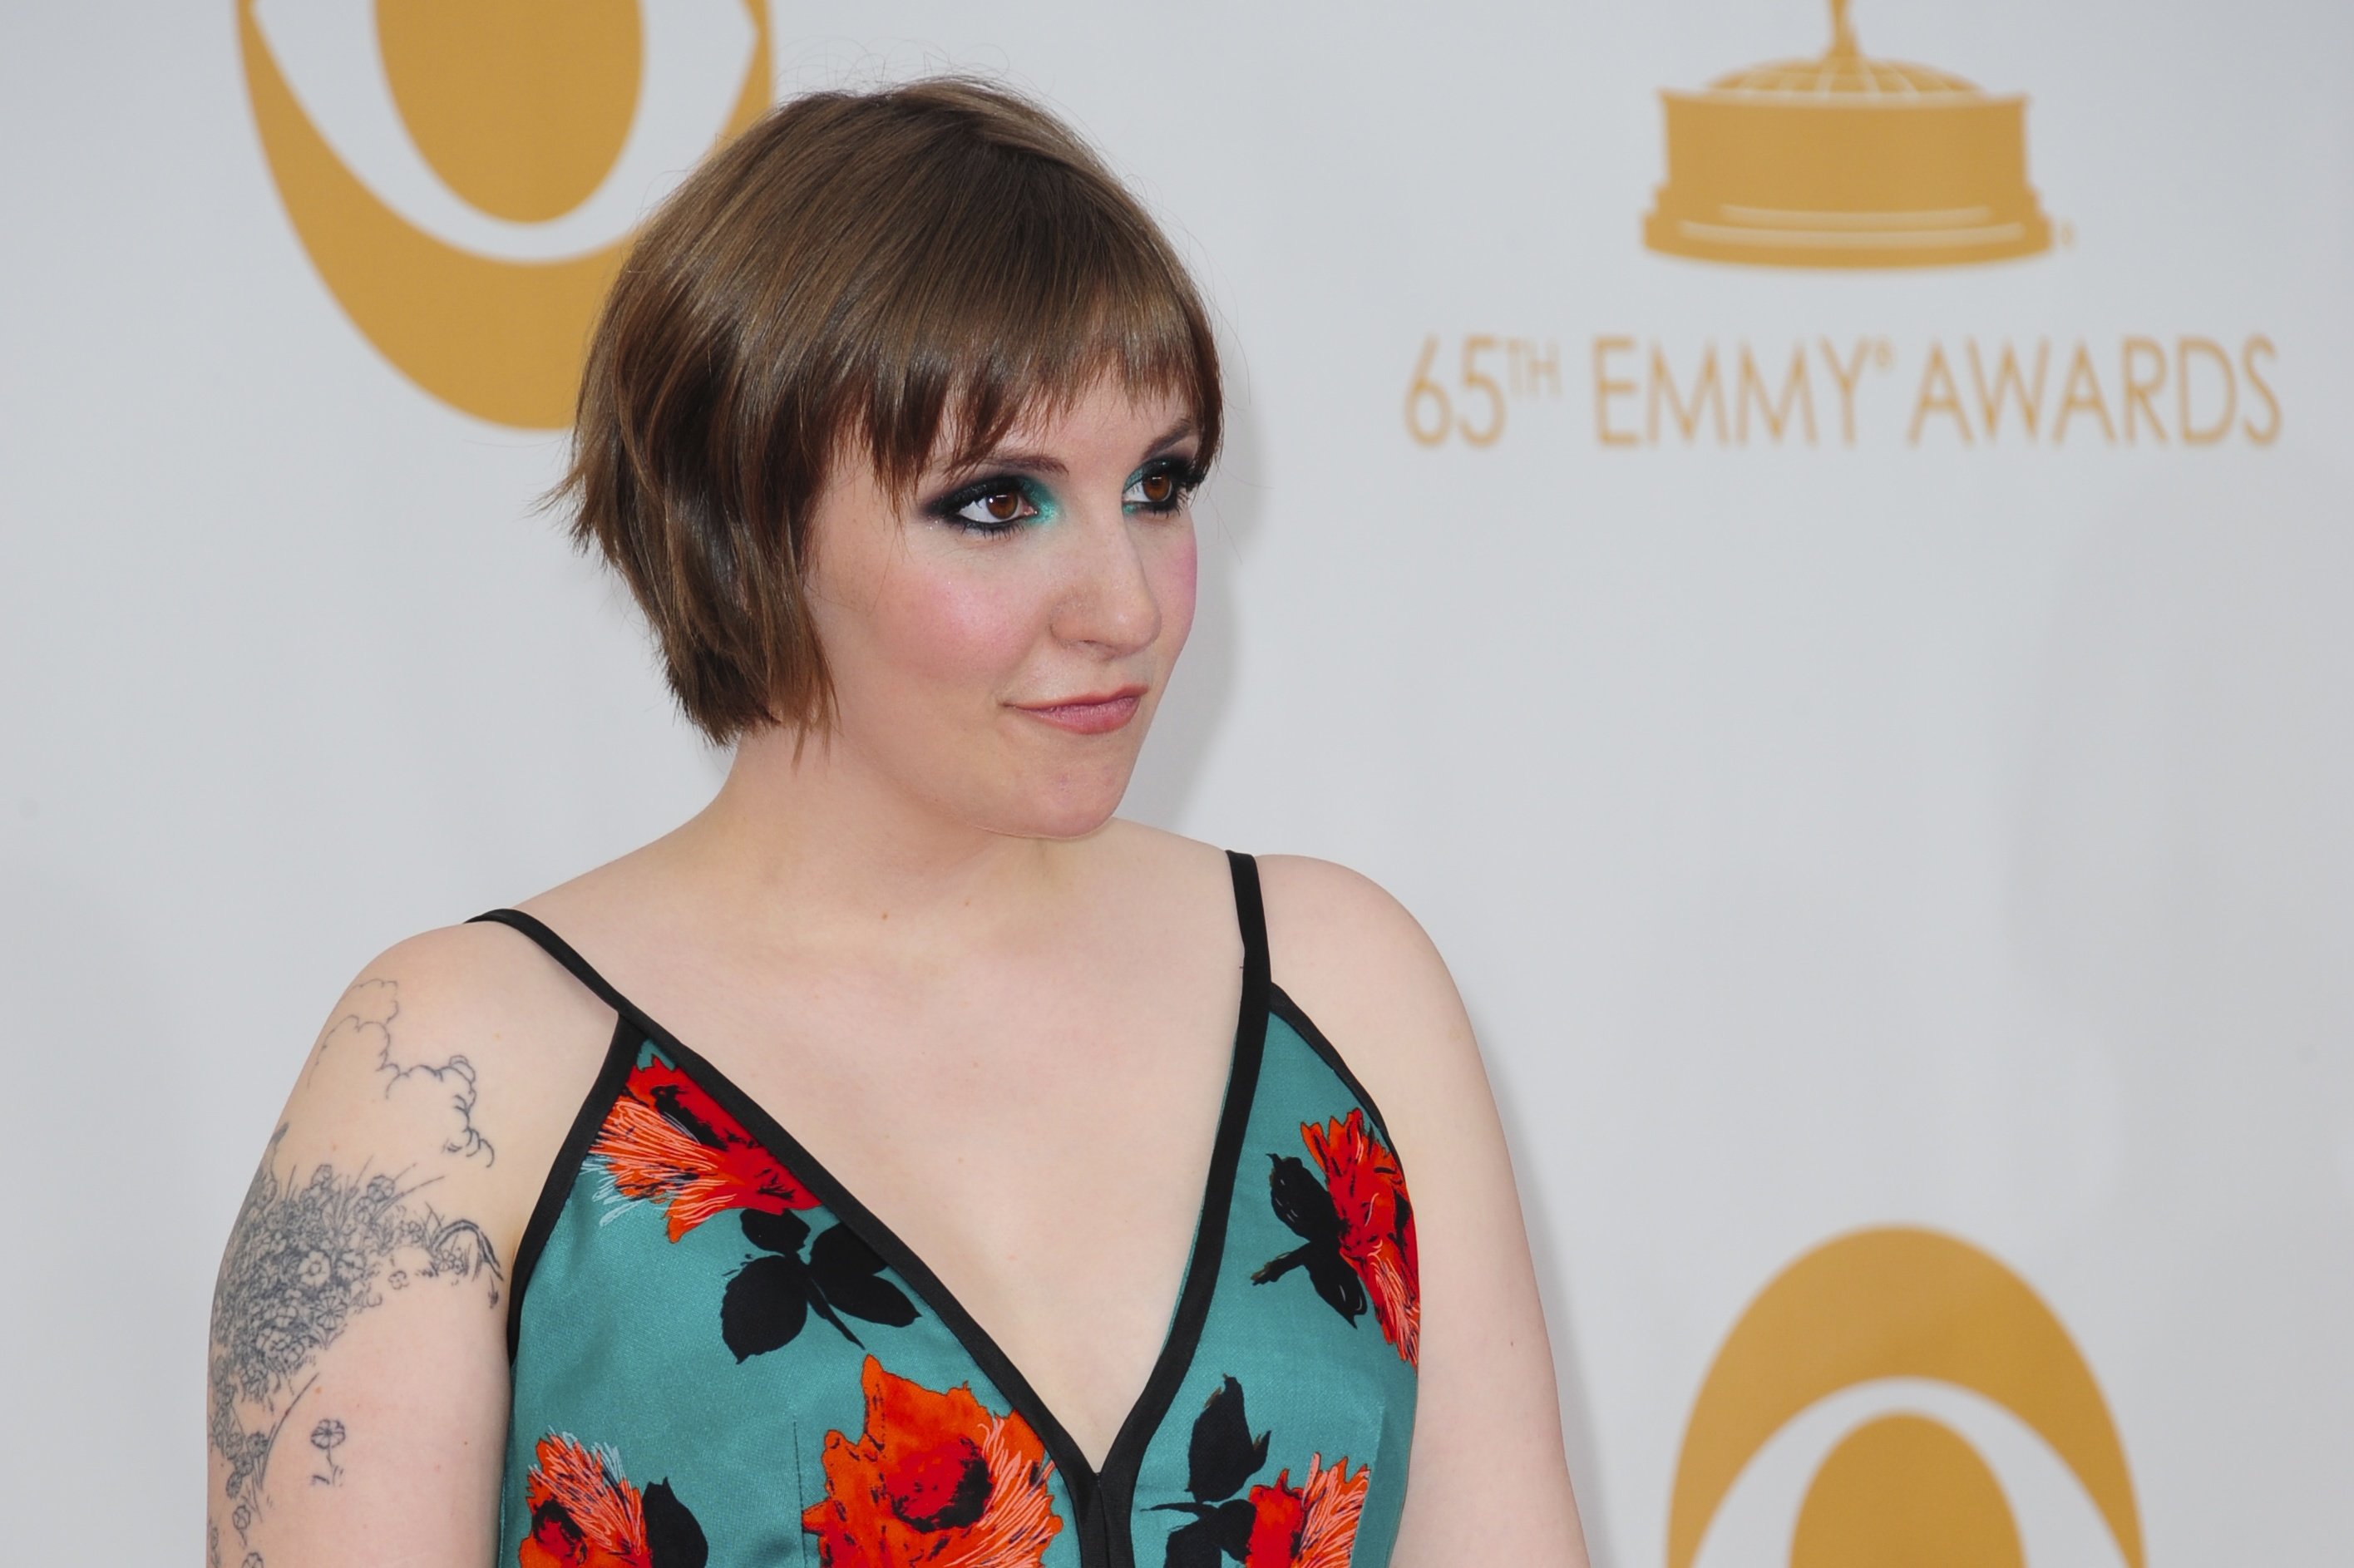 Actress Lena Dunham poses on the red carpet before attending the 65th Annual Primetime Emmy Awards in Los Angeles, California on September 22, 2013.